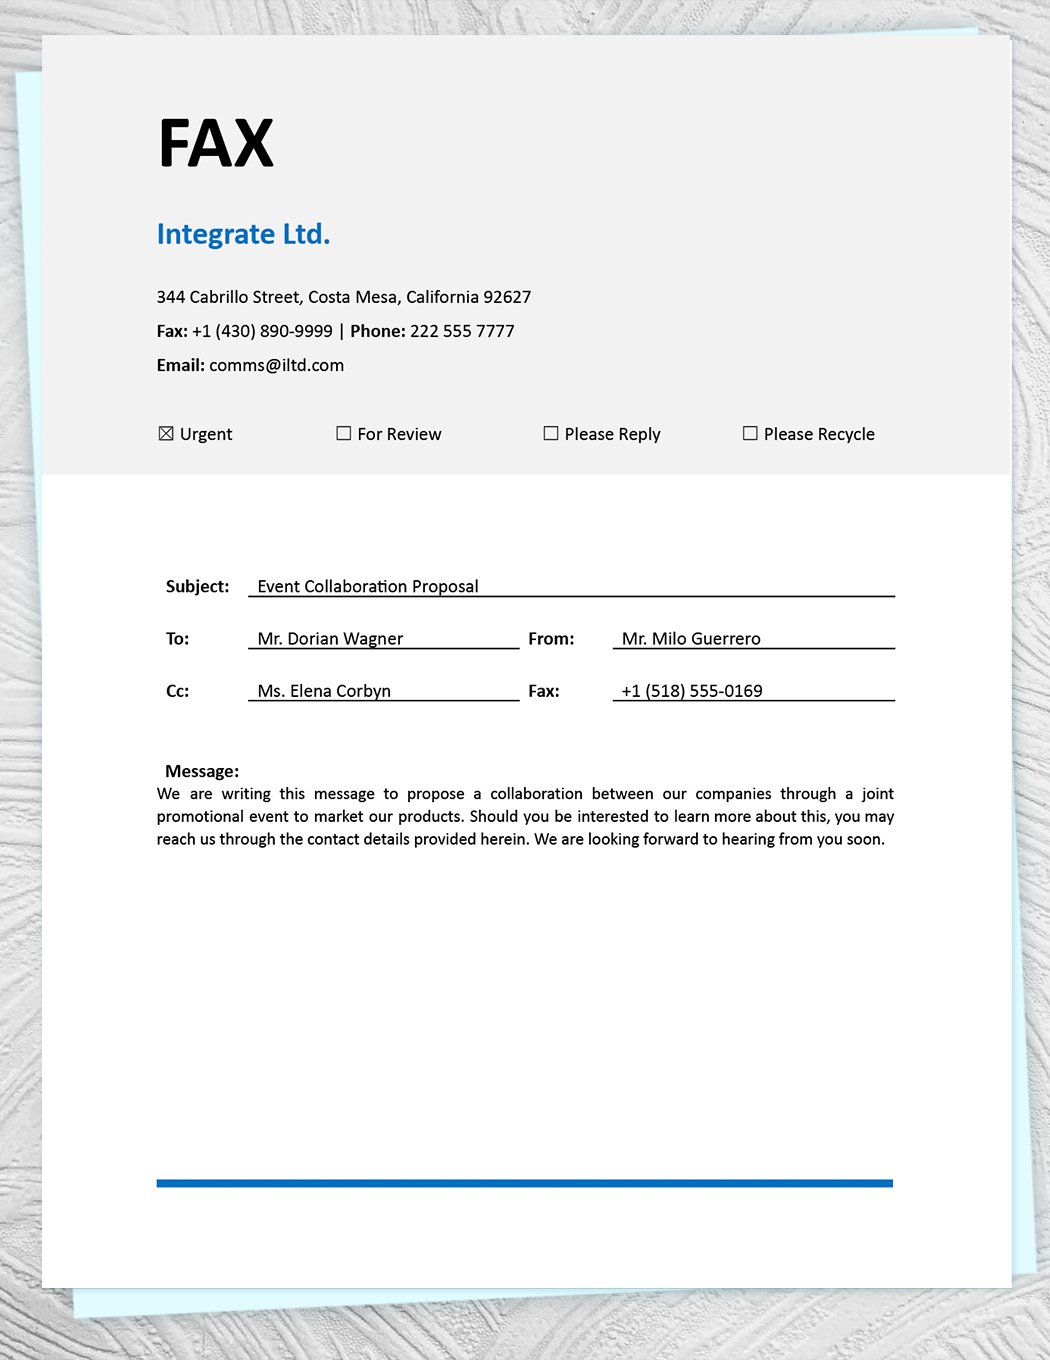 Marketing Fax Cover Sheet Template